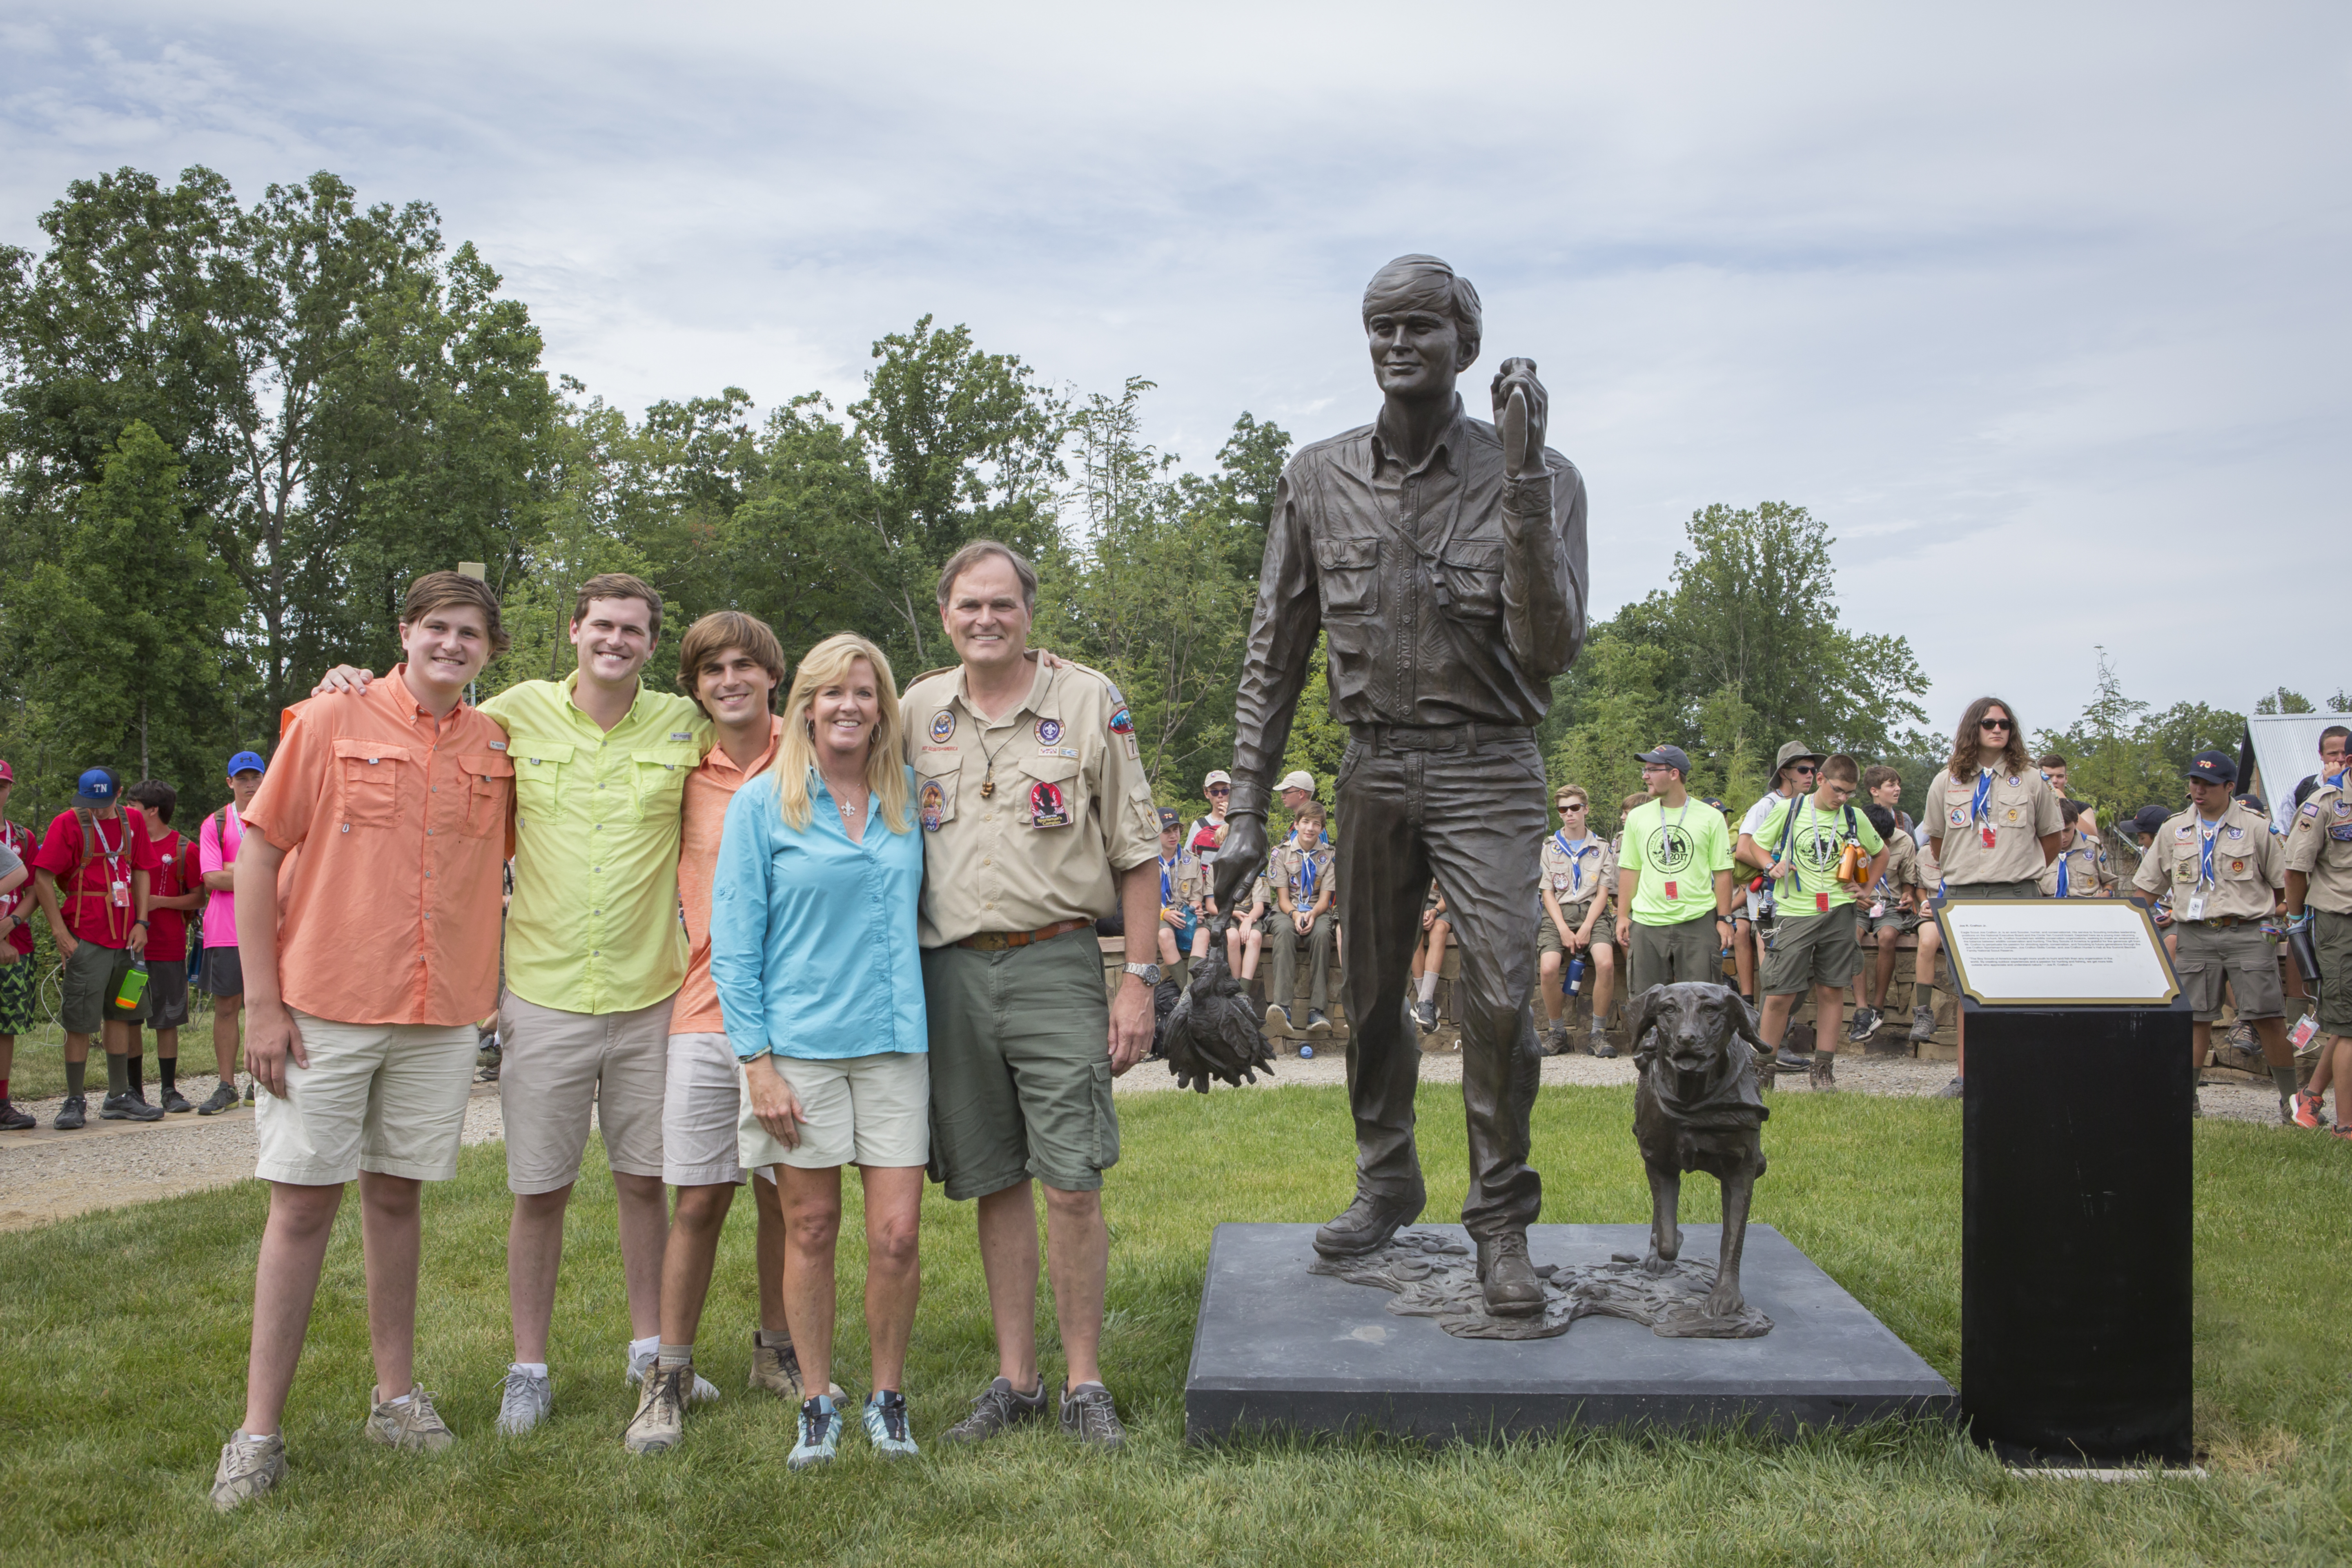 Joe Crafton Jr his three sons and his wife Amy Simmons Crafton standing next to statue at sportsman complex in west virginia for bsa sportsman